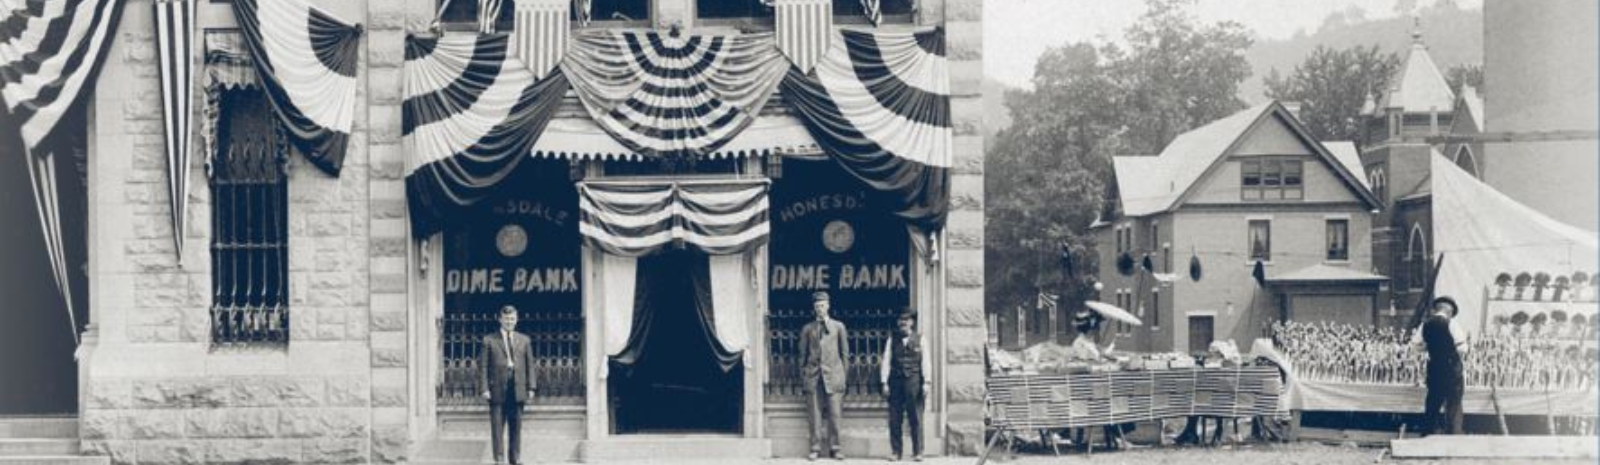 The Dime Bank first headquarter building in the 1900s.